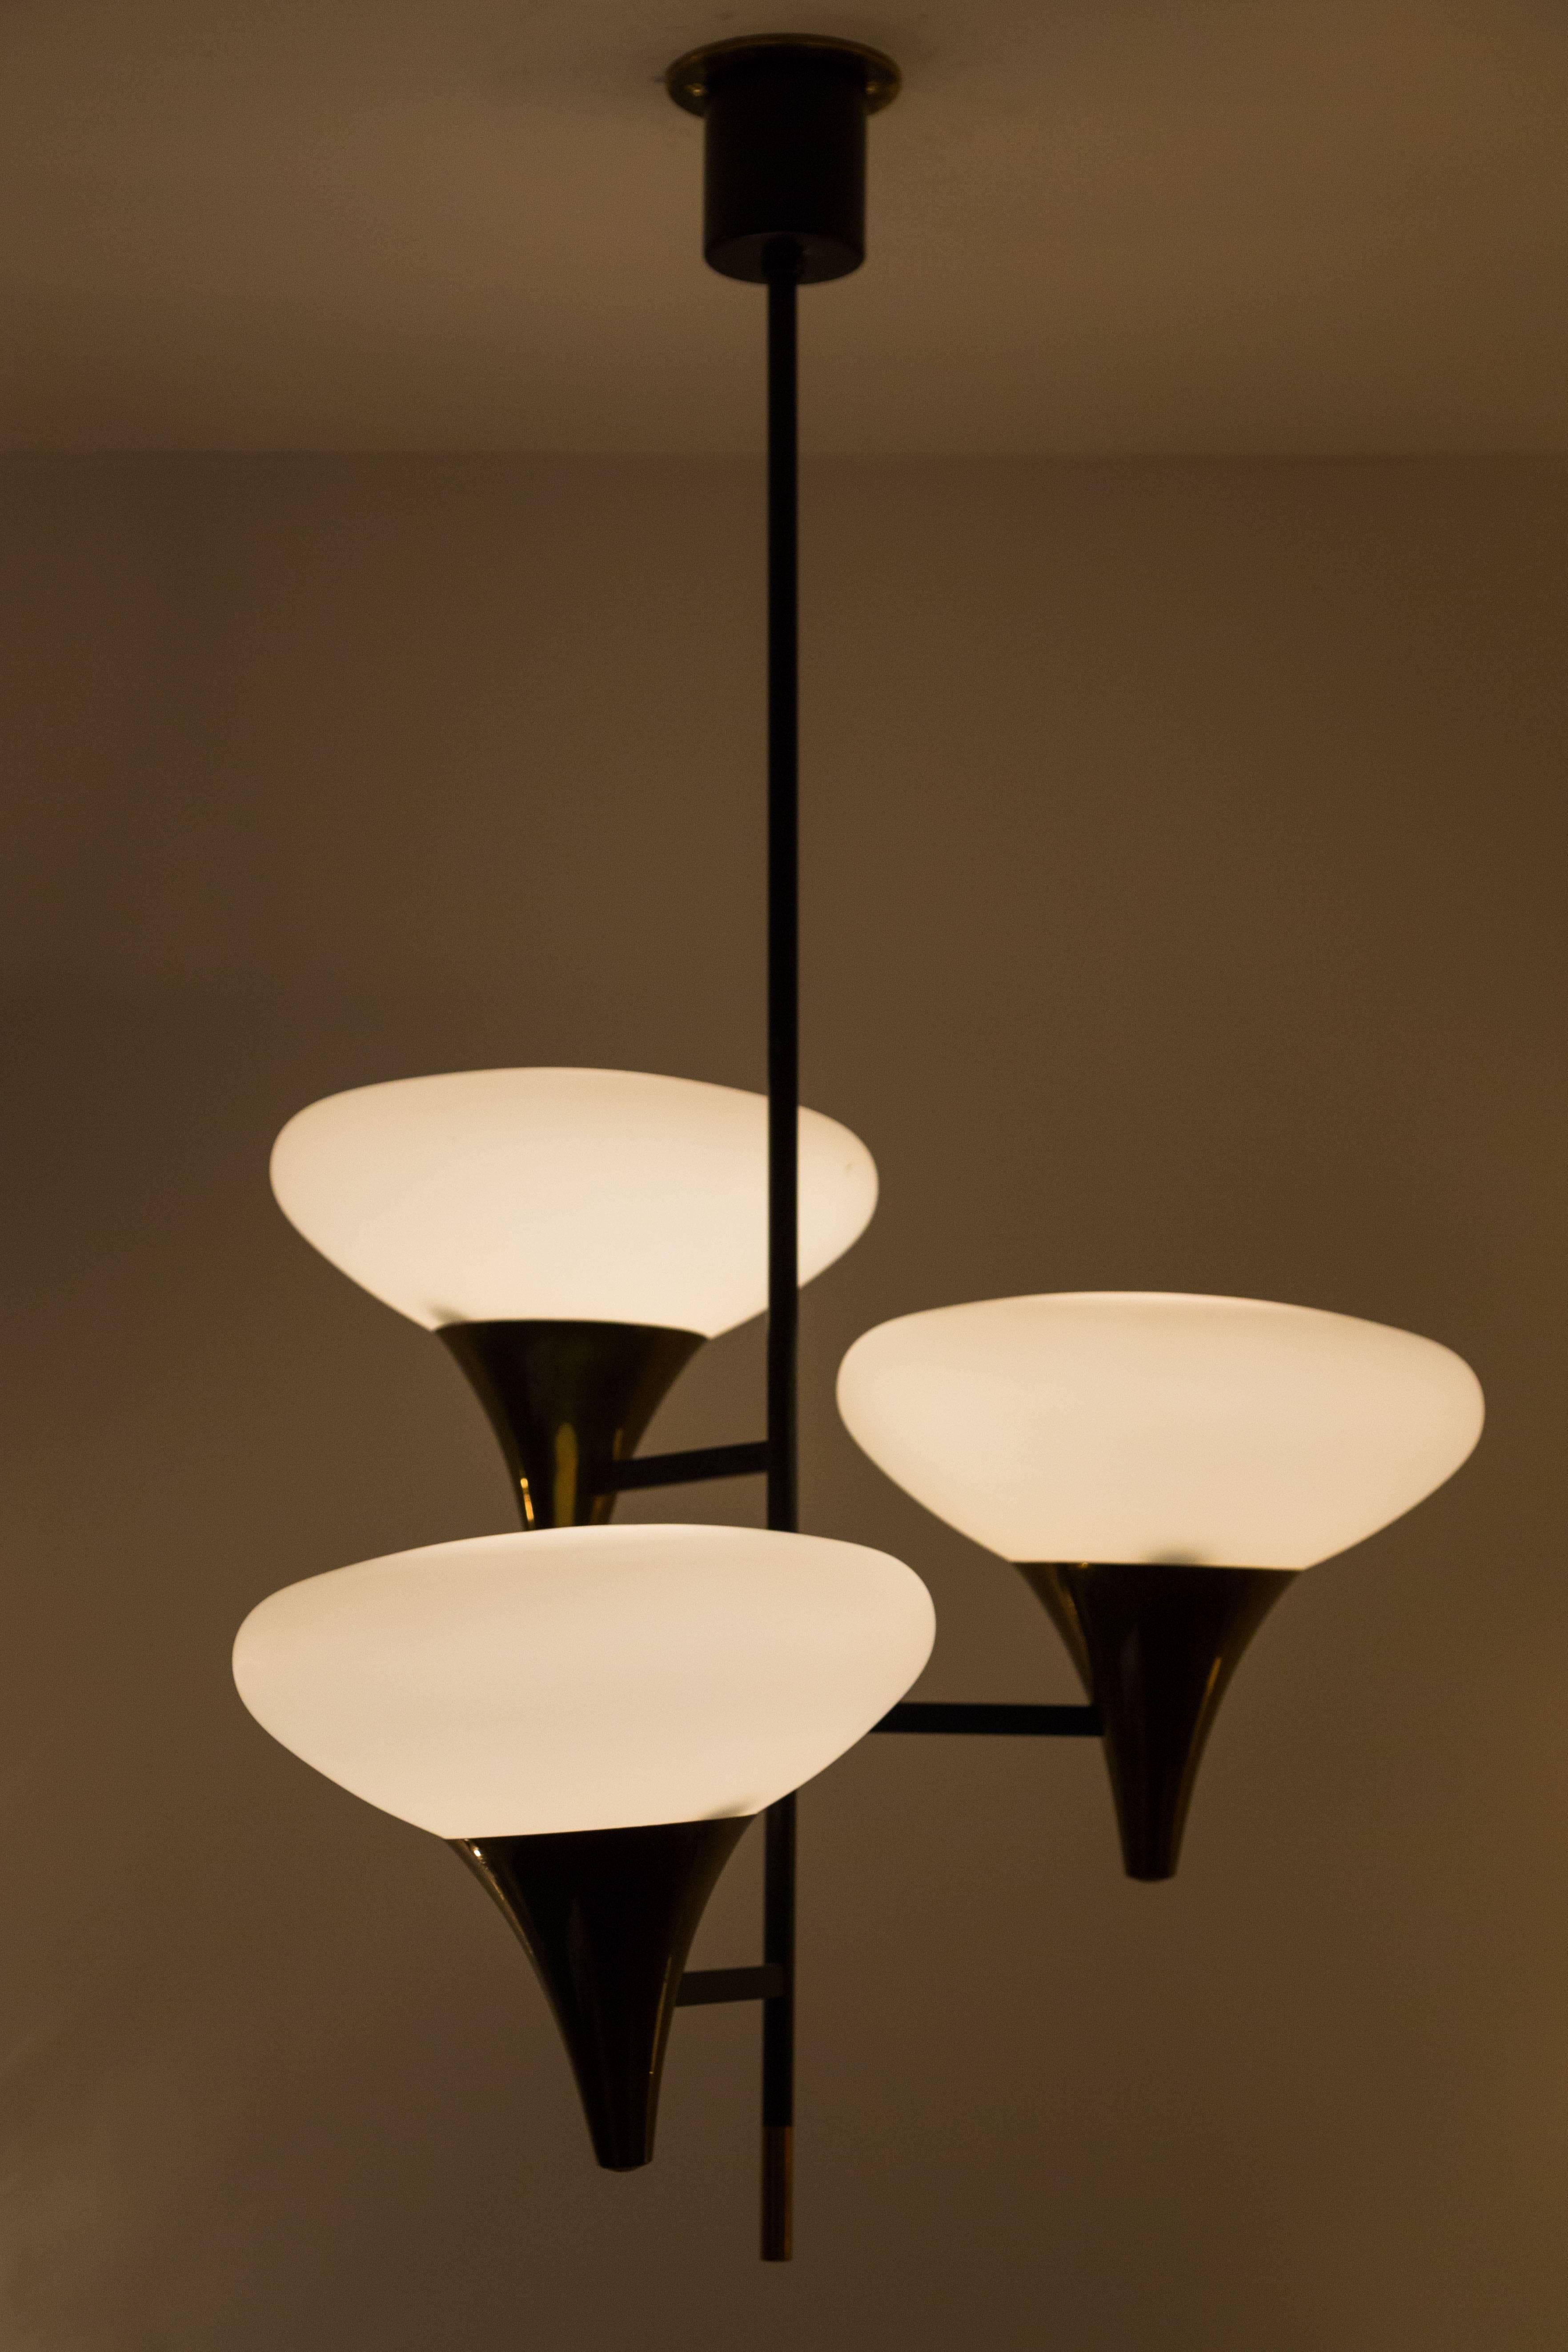 Three-arm chandelier, lacquered metal, polished brass, white satin glass diffusers. Attributed to Stilnovo, circa 1960s. Rewired. E27 60w maximum bulbs. Overall drop can be customized.
 